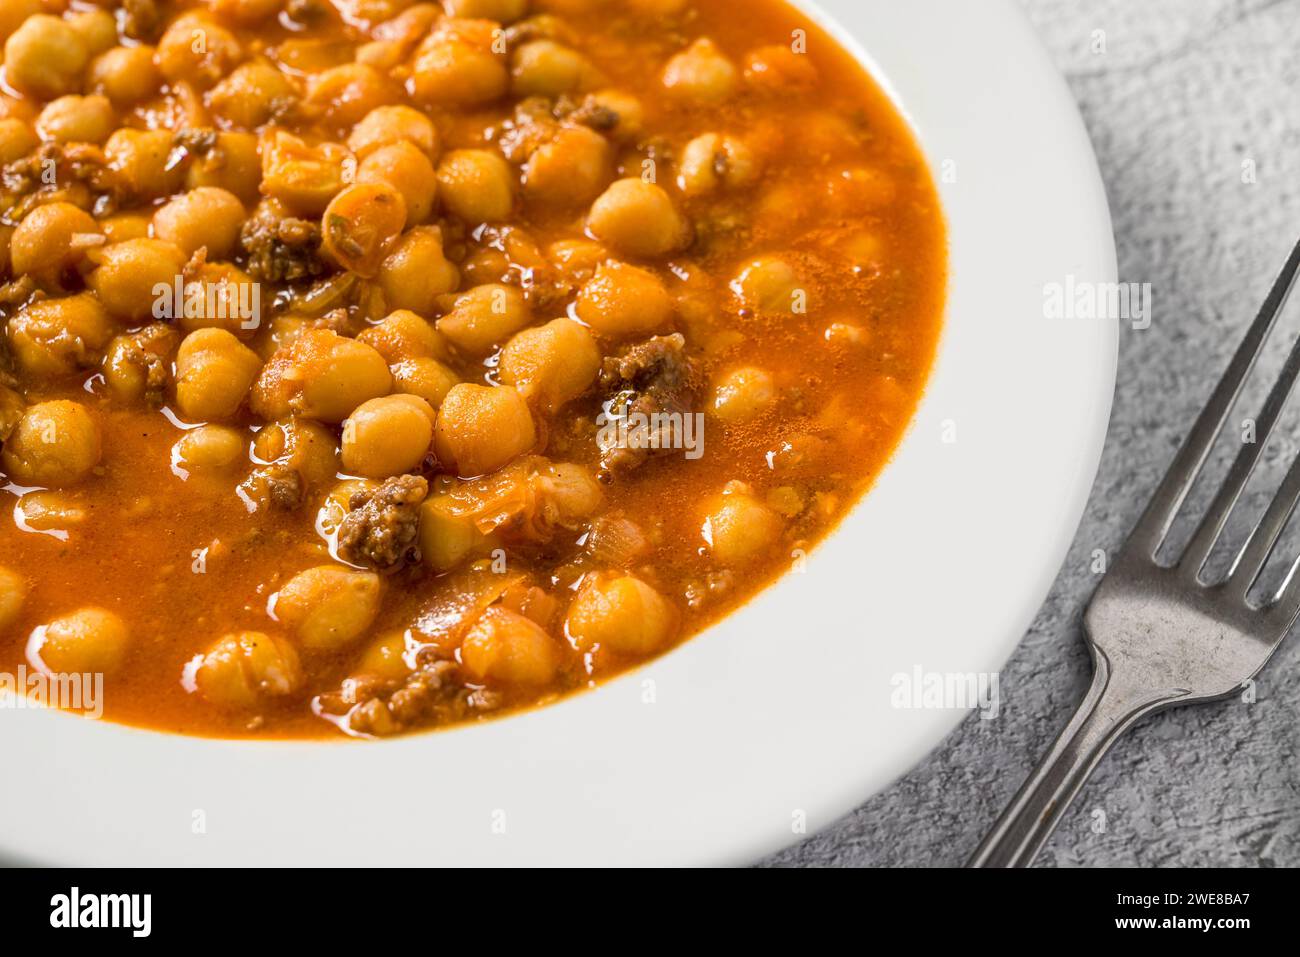 Chickpea stew with minced meat on a white porcelain plate on a stone table Stock Photo